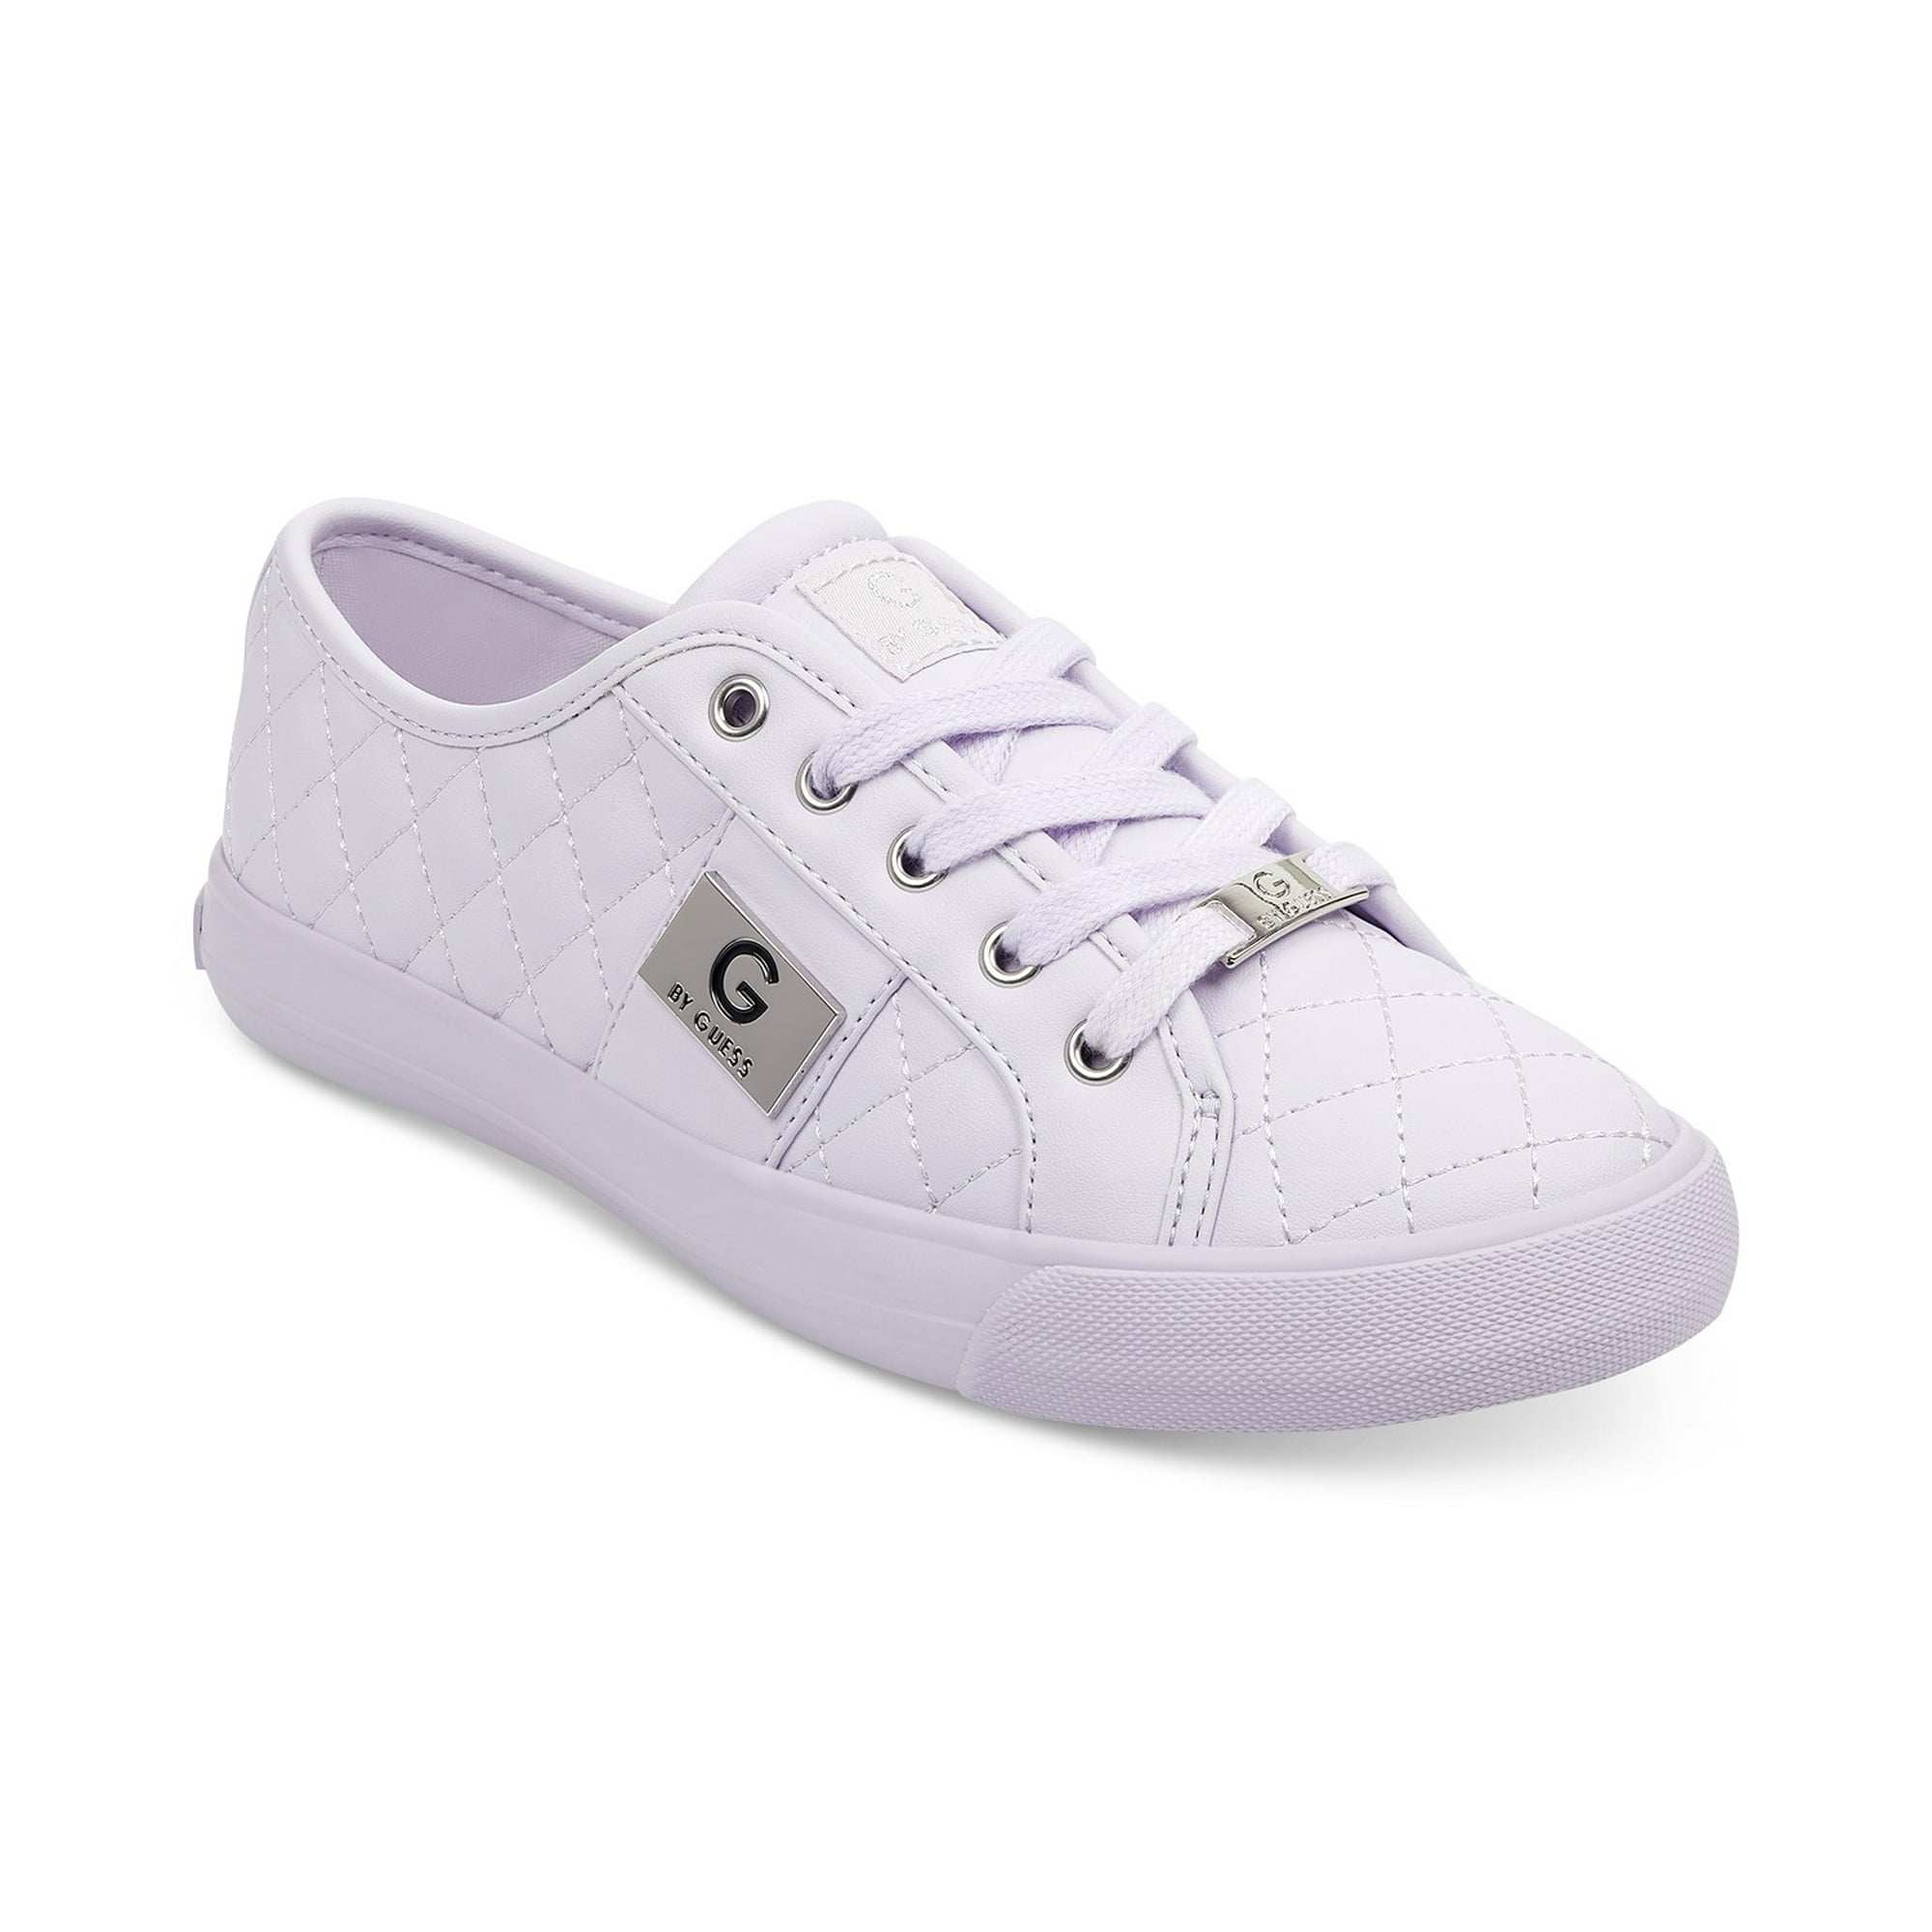 Integral privatliv Udløbet G by Guess Women's Lace Up Leather Quilted Pattern Sneakers Shoes Light  Purple (7.5) - Walmart.com